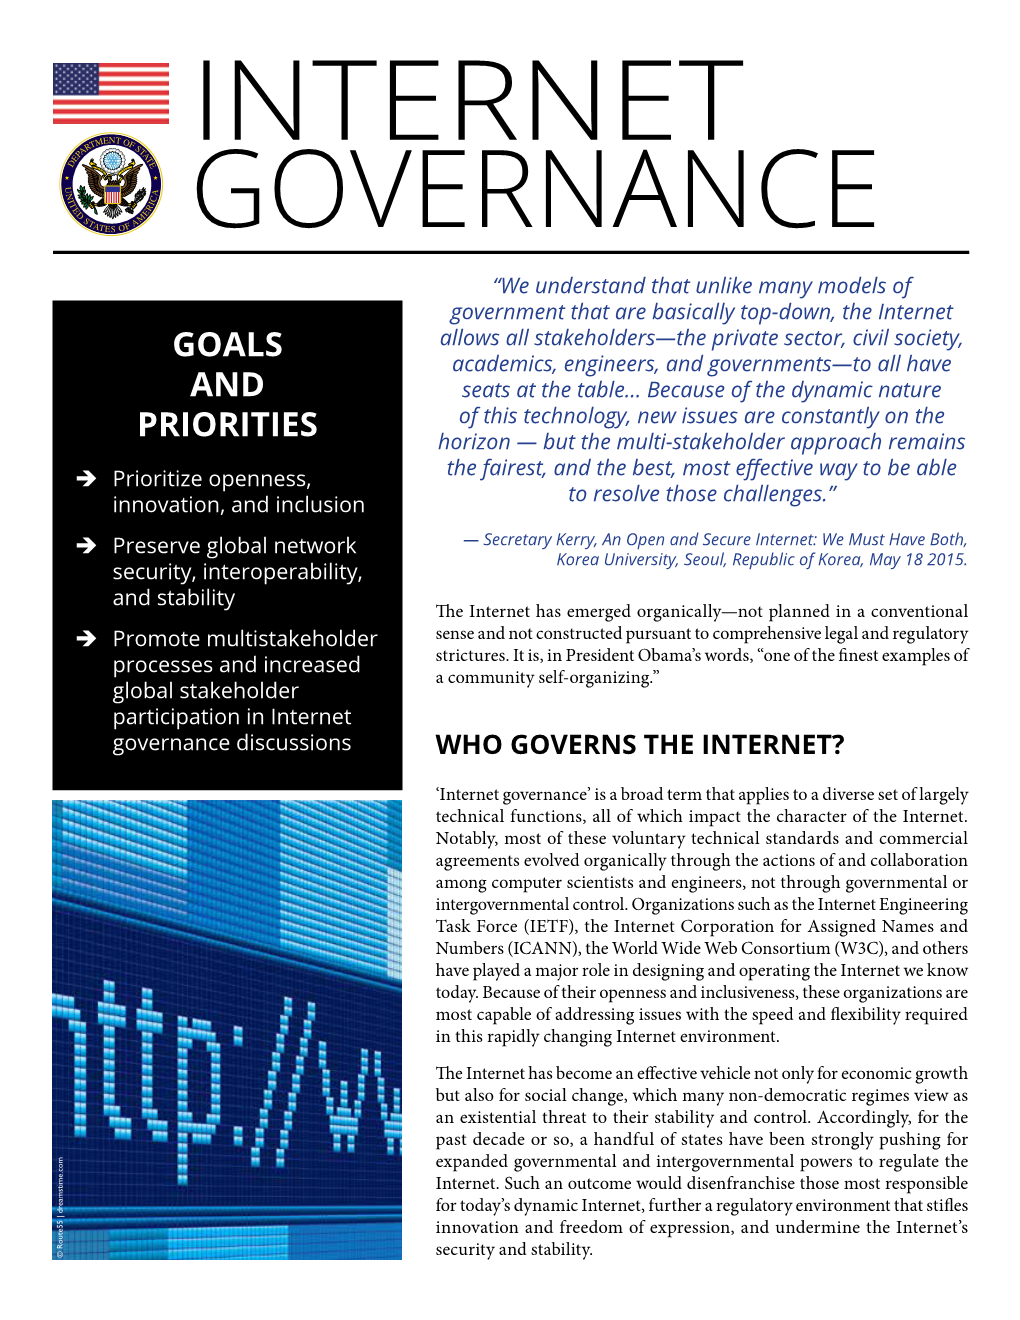 Internet Governance Discussions WHO GOVERNS the INTERNET?